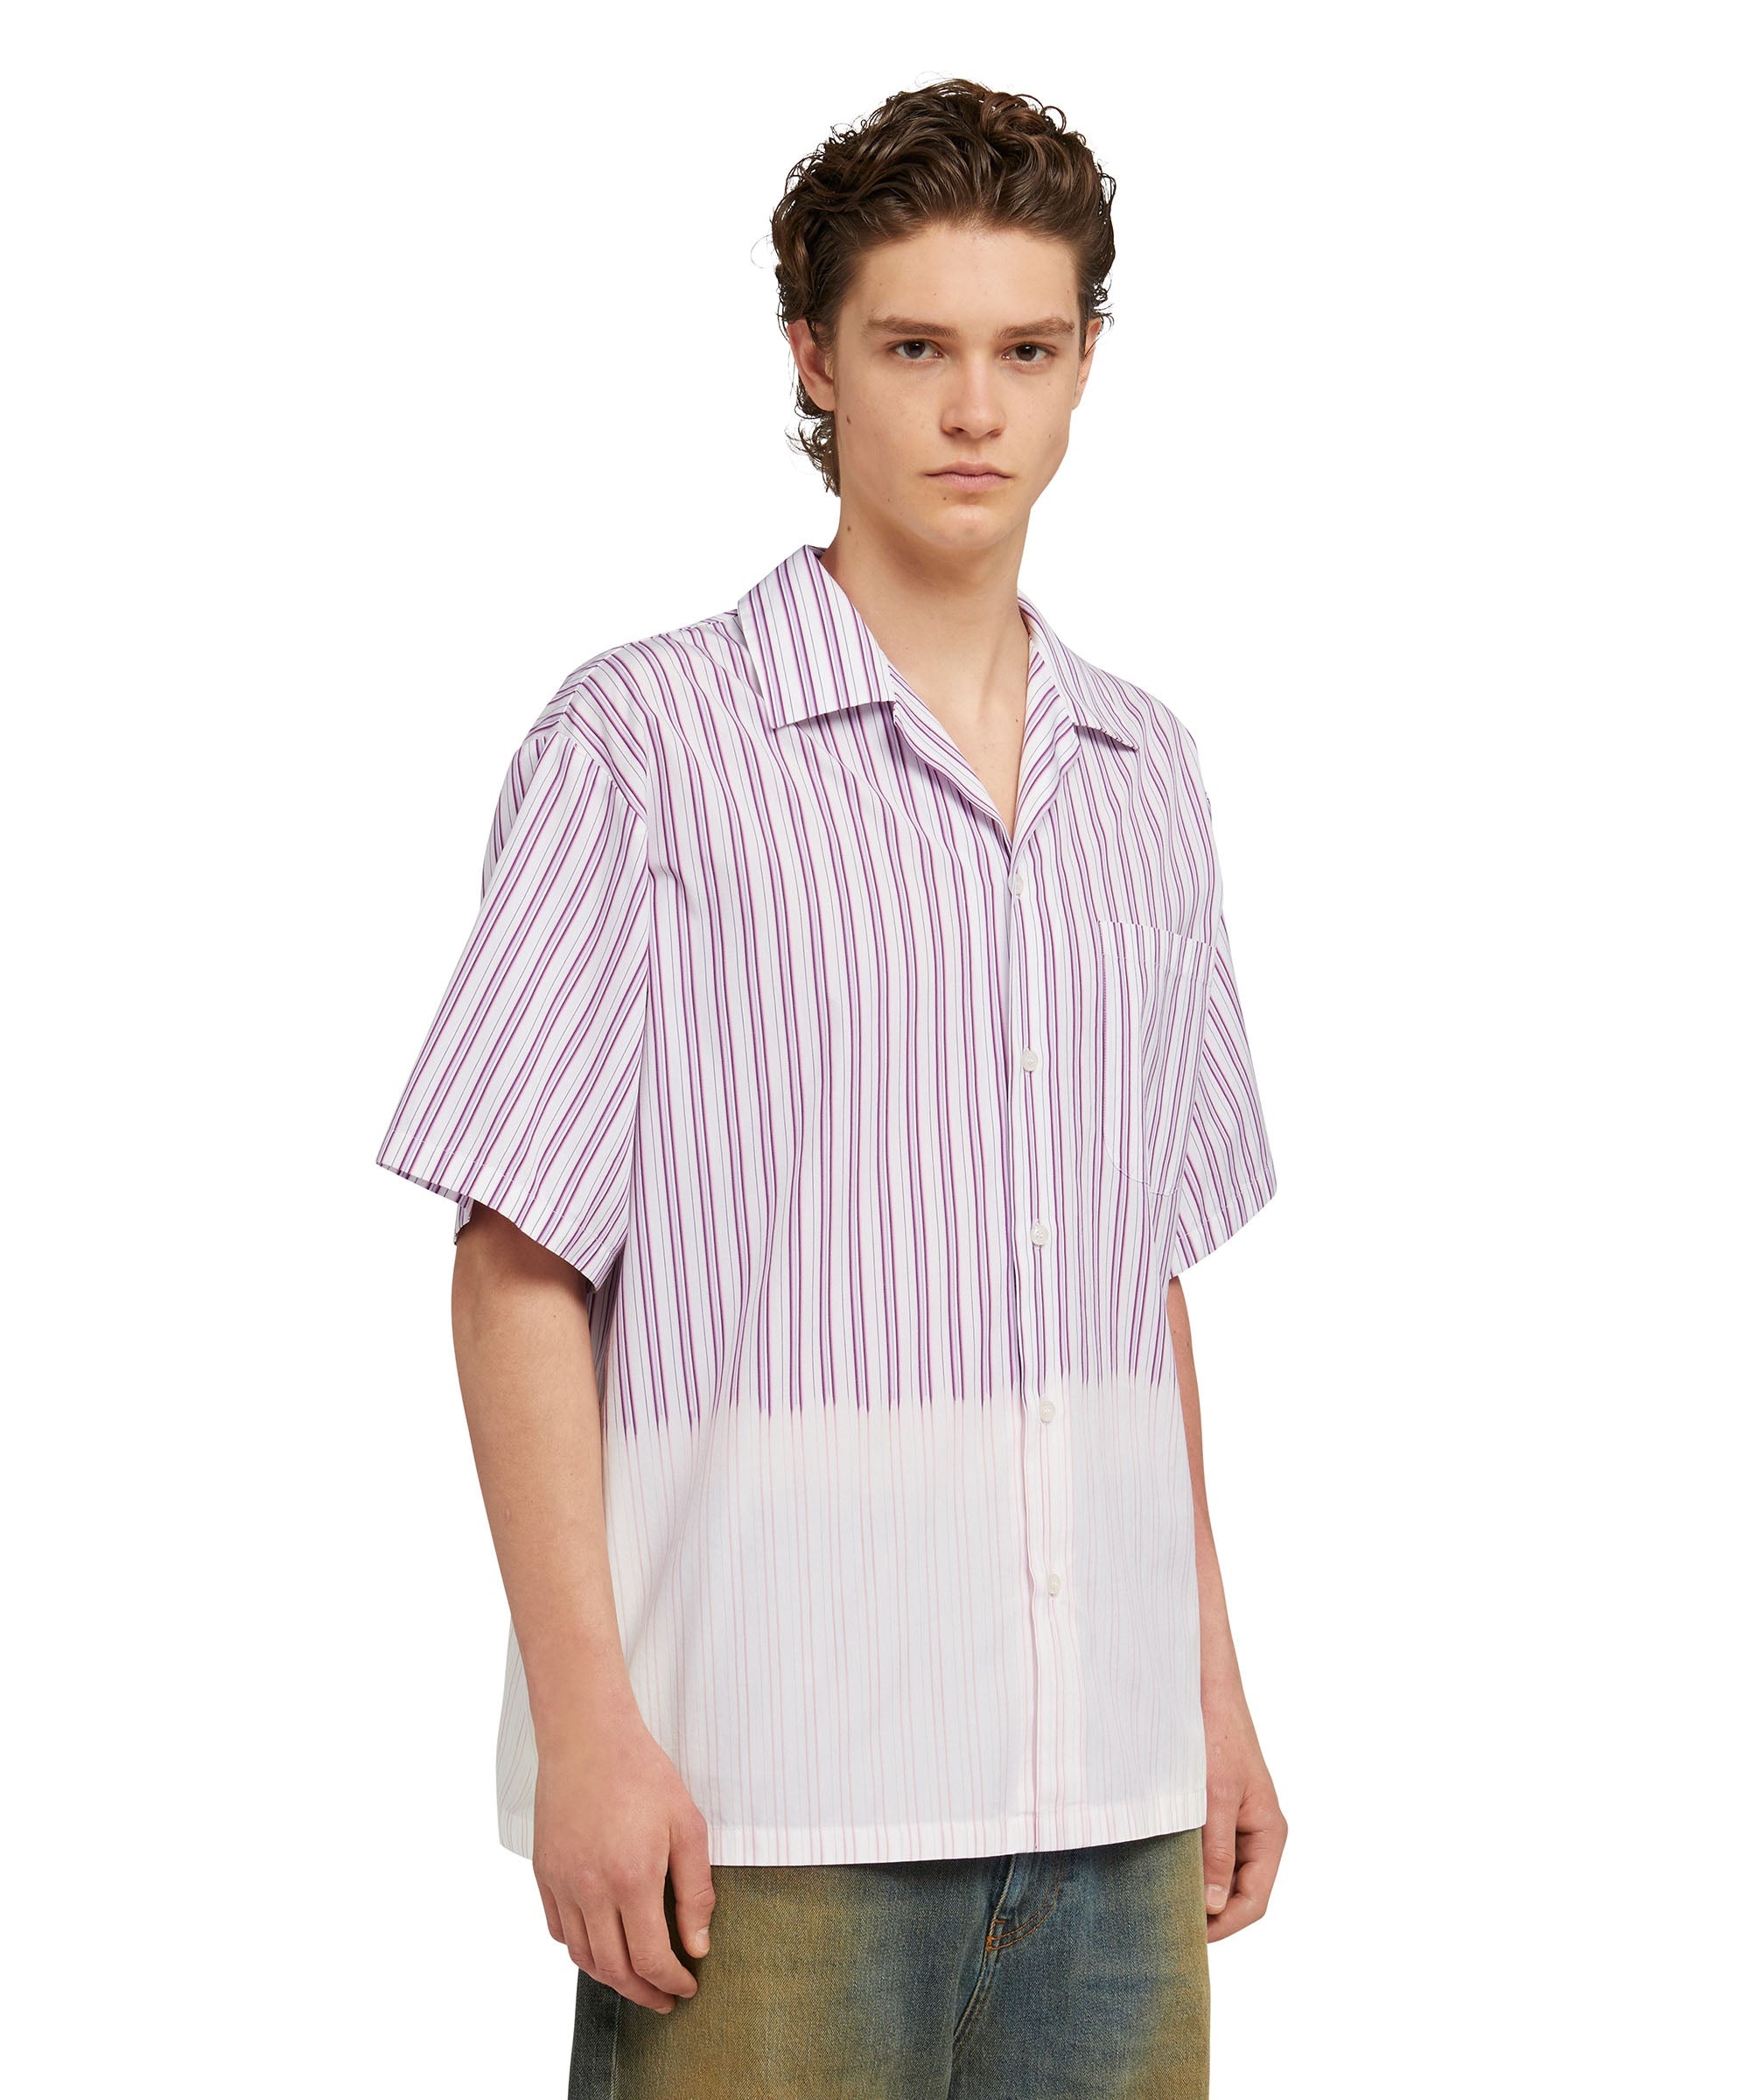 Poplin bowling shirt with faded treatment - 4